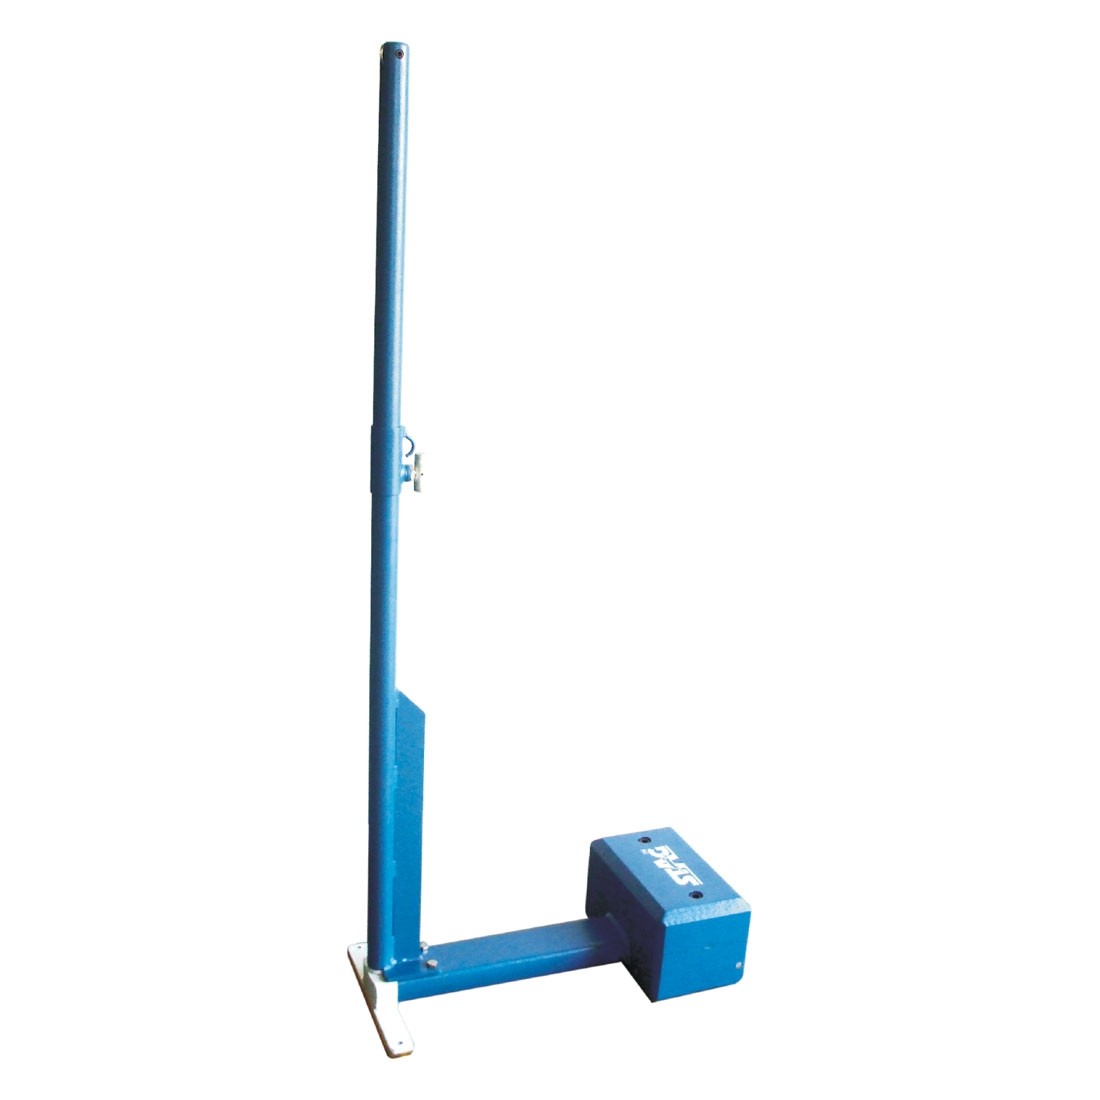 PORTABLE BADMINTON POST, 80KG WEIGHT ON EACH SIDE